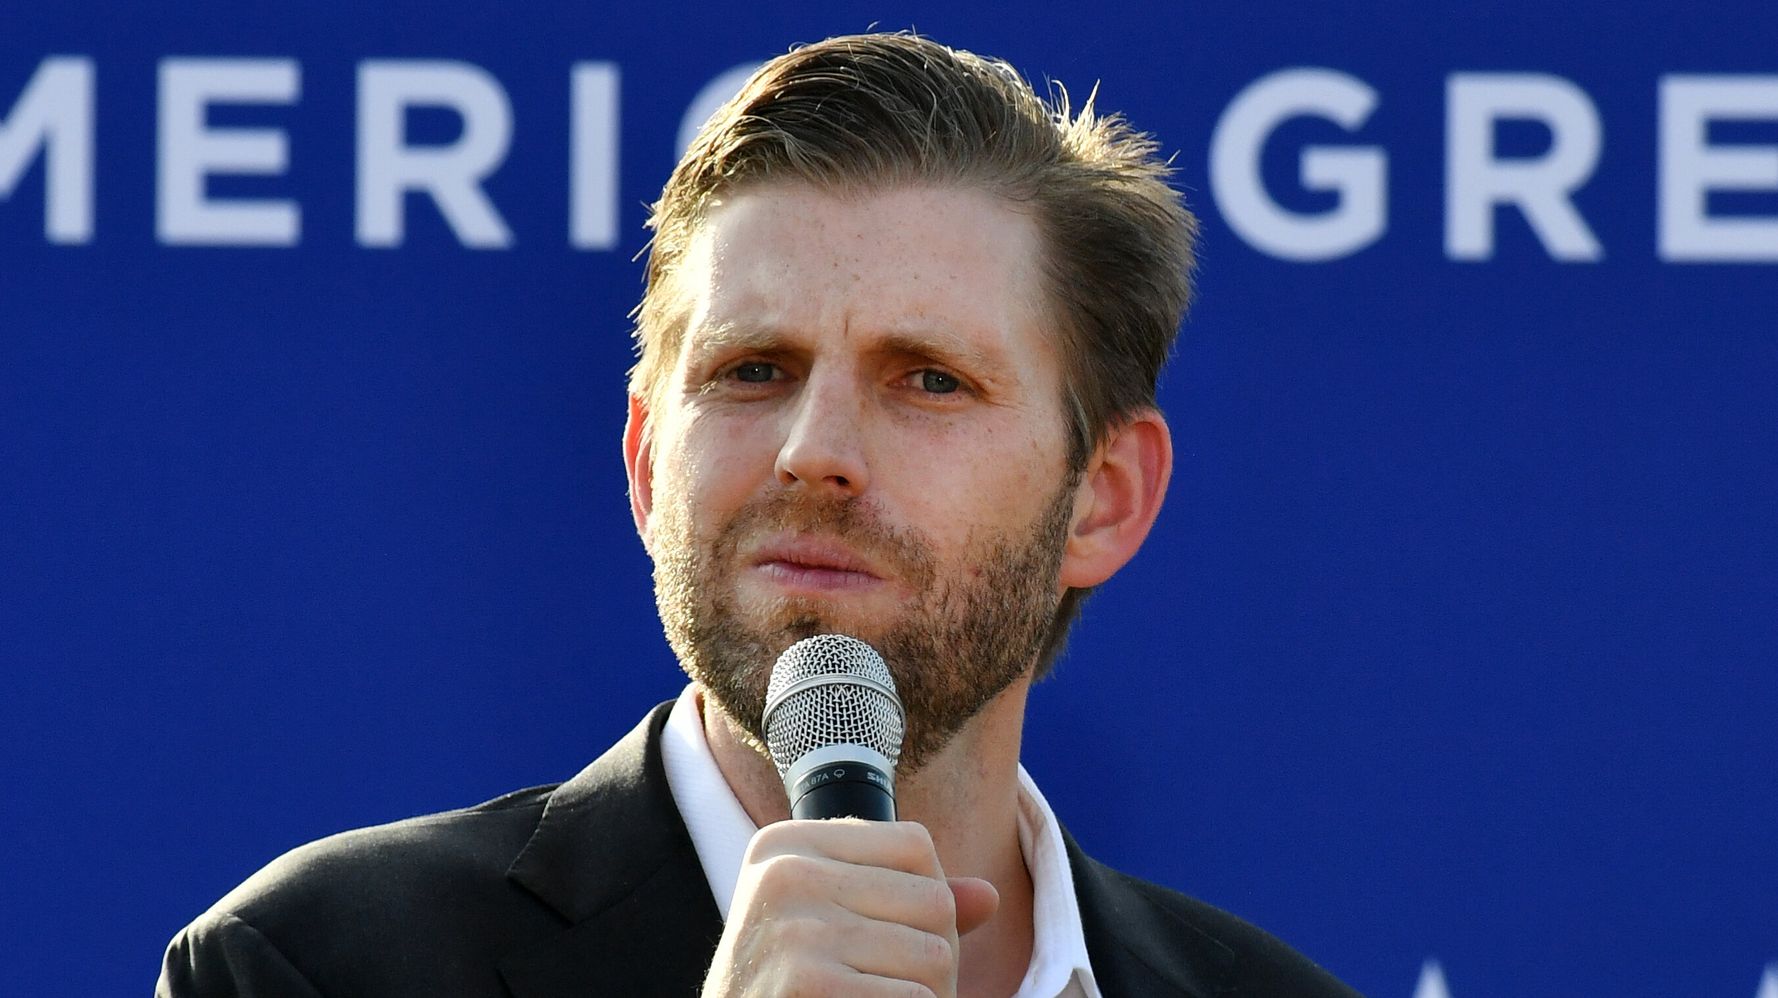 Eric Trump’s Latest Whine Prompts People To Play The World’s Smallest Violin